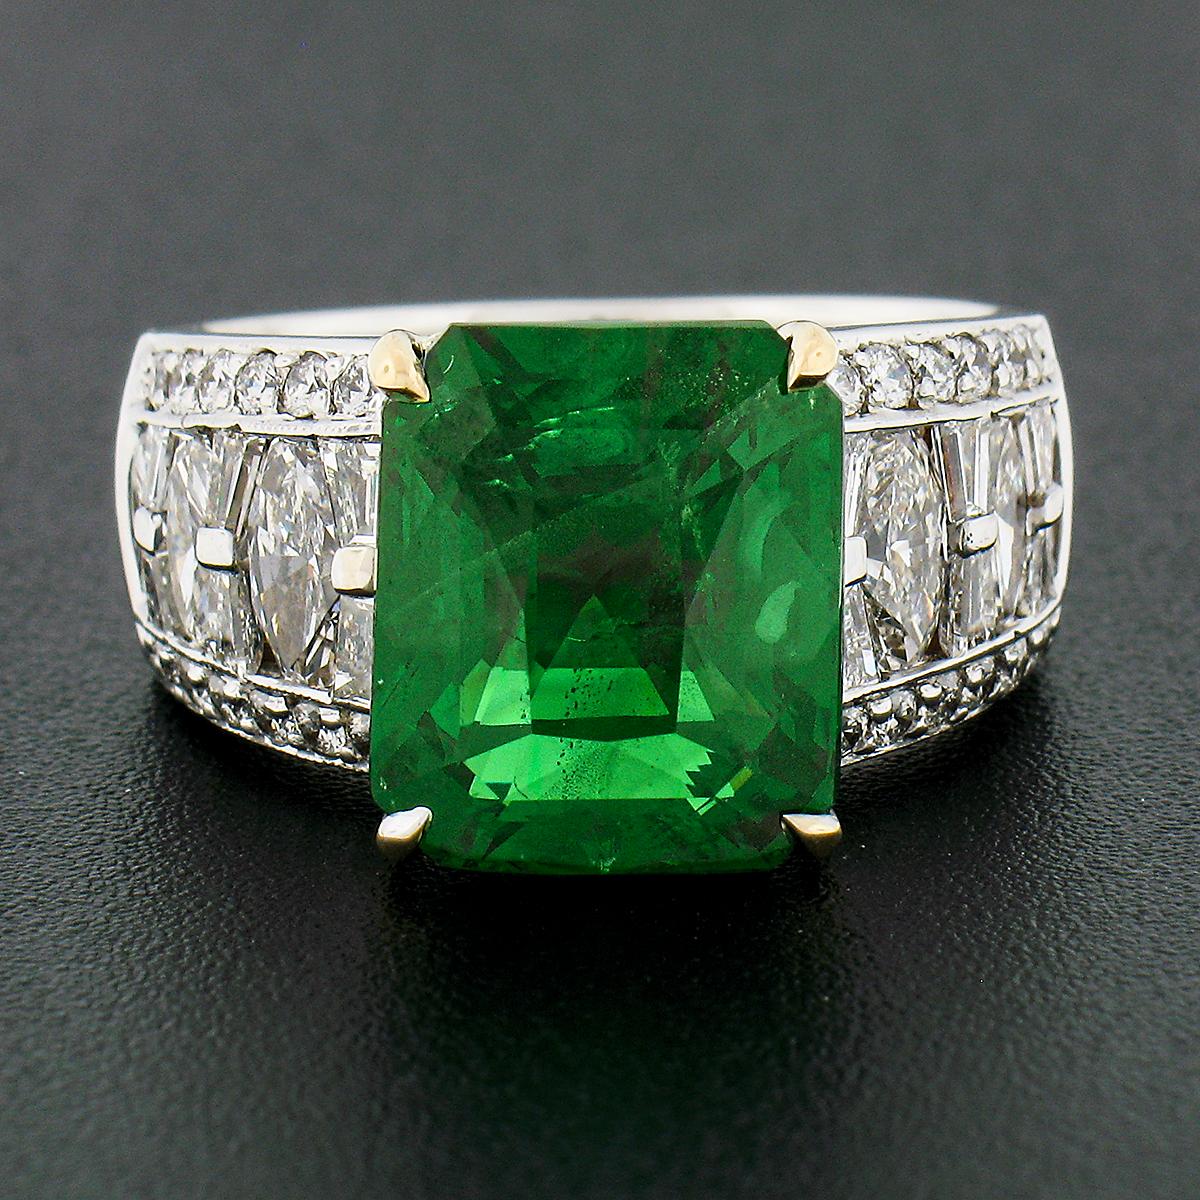 This absolutely breathtaking tsavorite and diamond ring was crafted in solid 18k white gold with a solid 18k yellow gold center basket that carries a gorgeous, emerald cut, natural tsavorite stone. The large solitaire is perfectly prong set and GIA